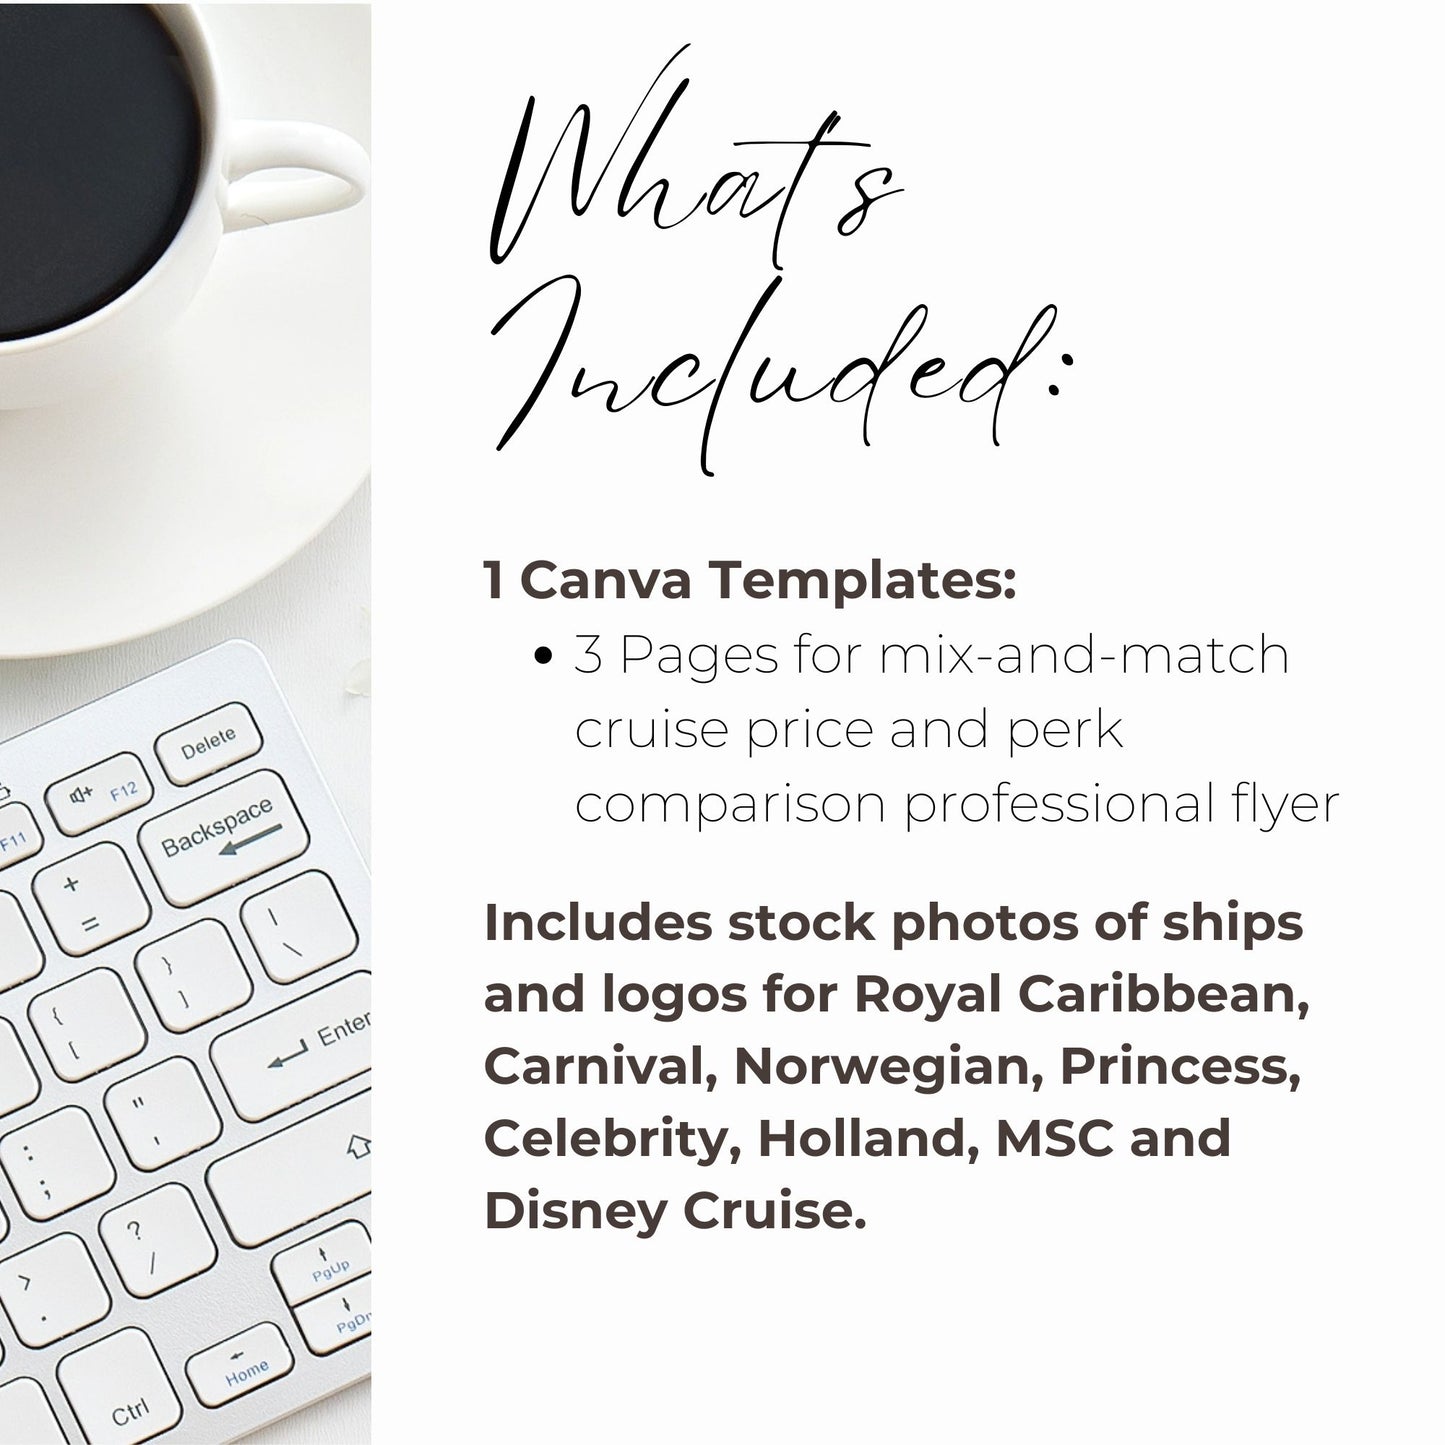 Cruise Perks and Company Comparison Flyer made in Canva